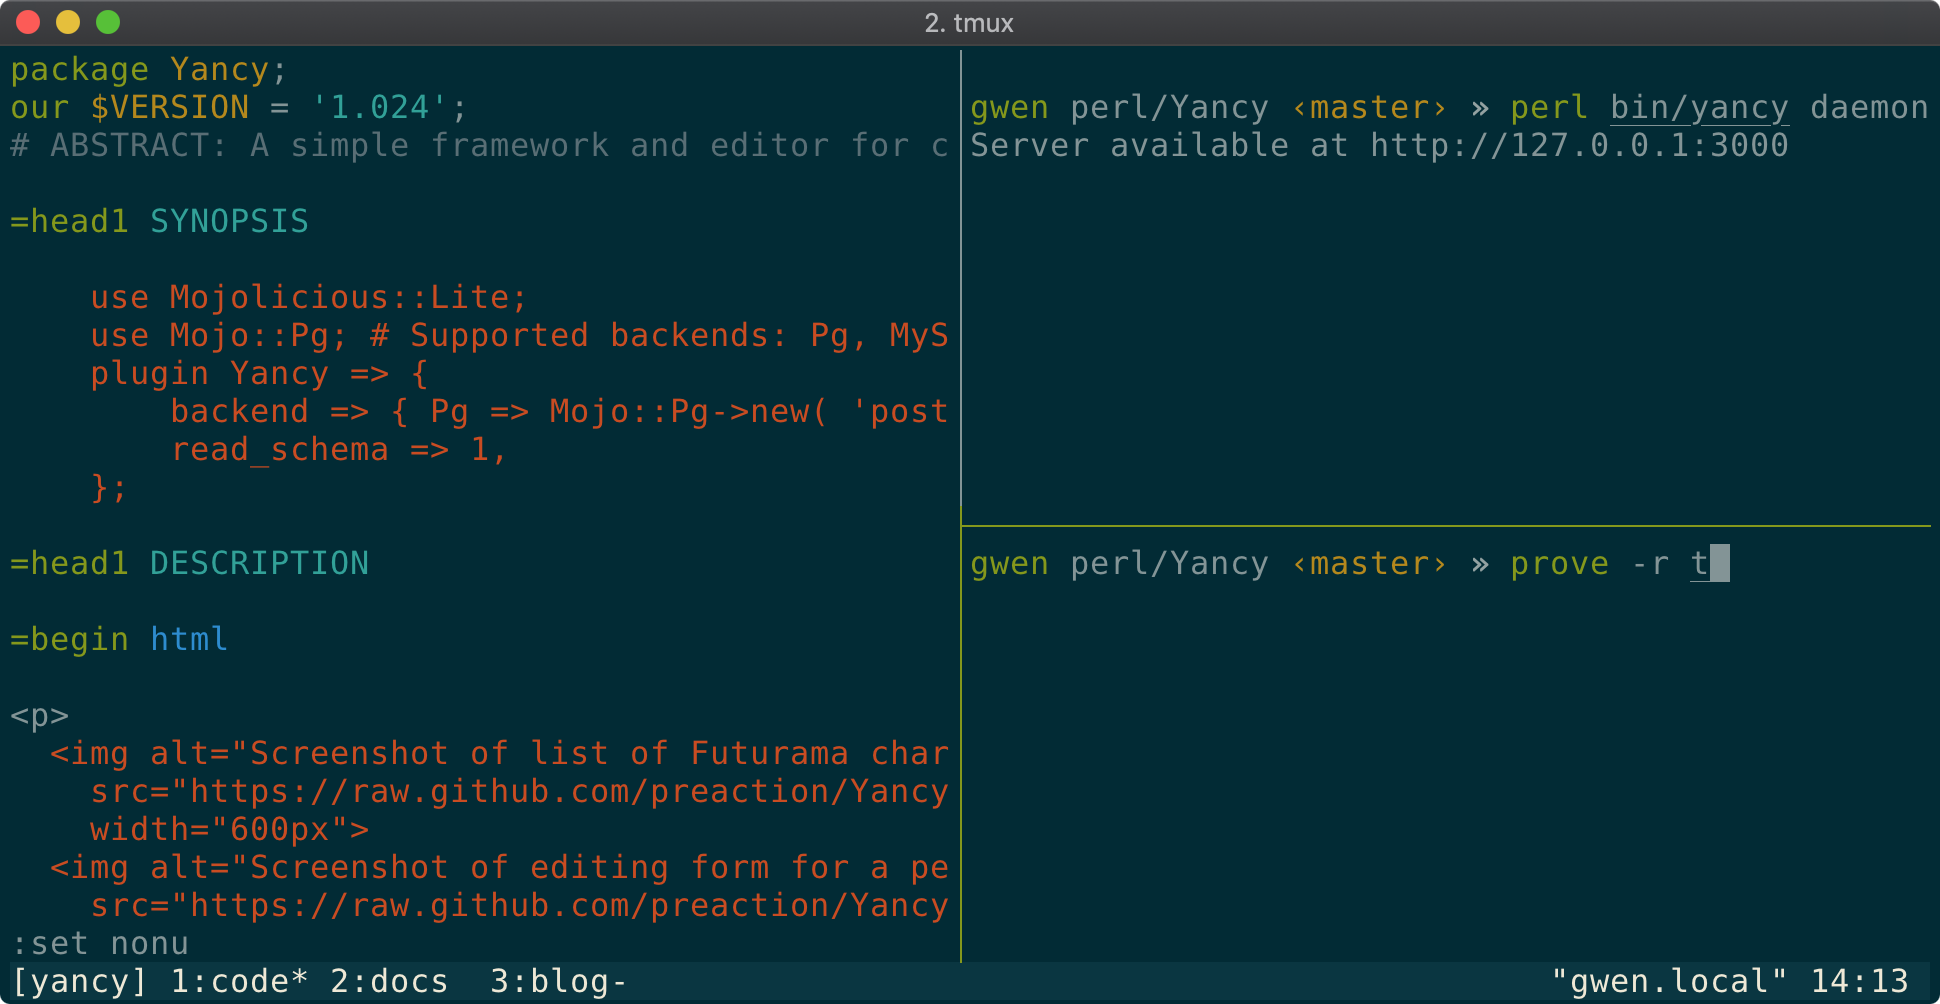 A Tmux window showing three panes with Vim and other commands running